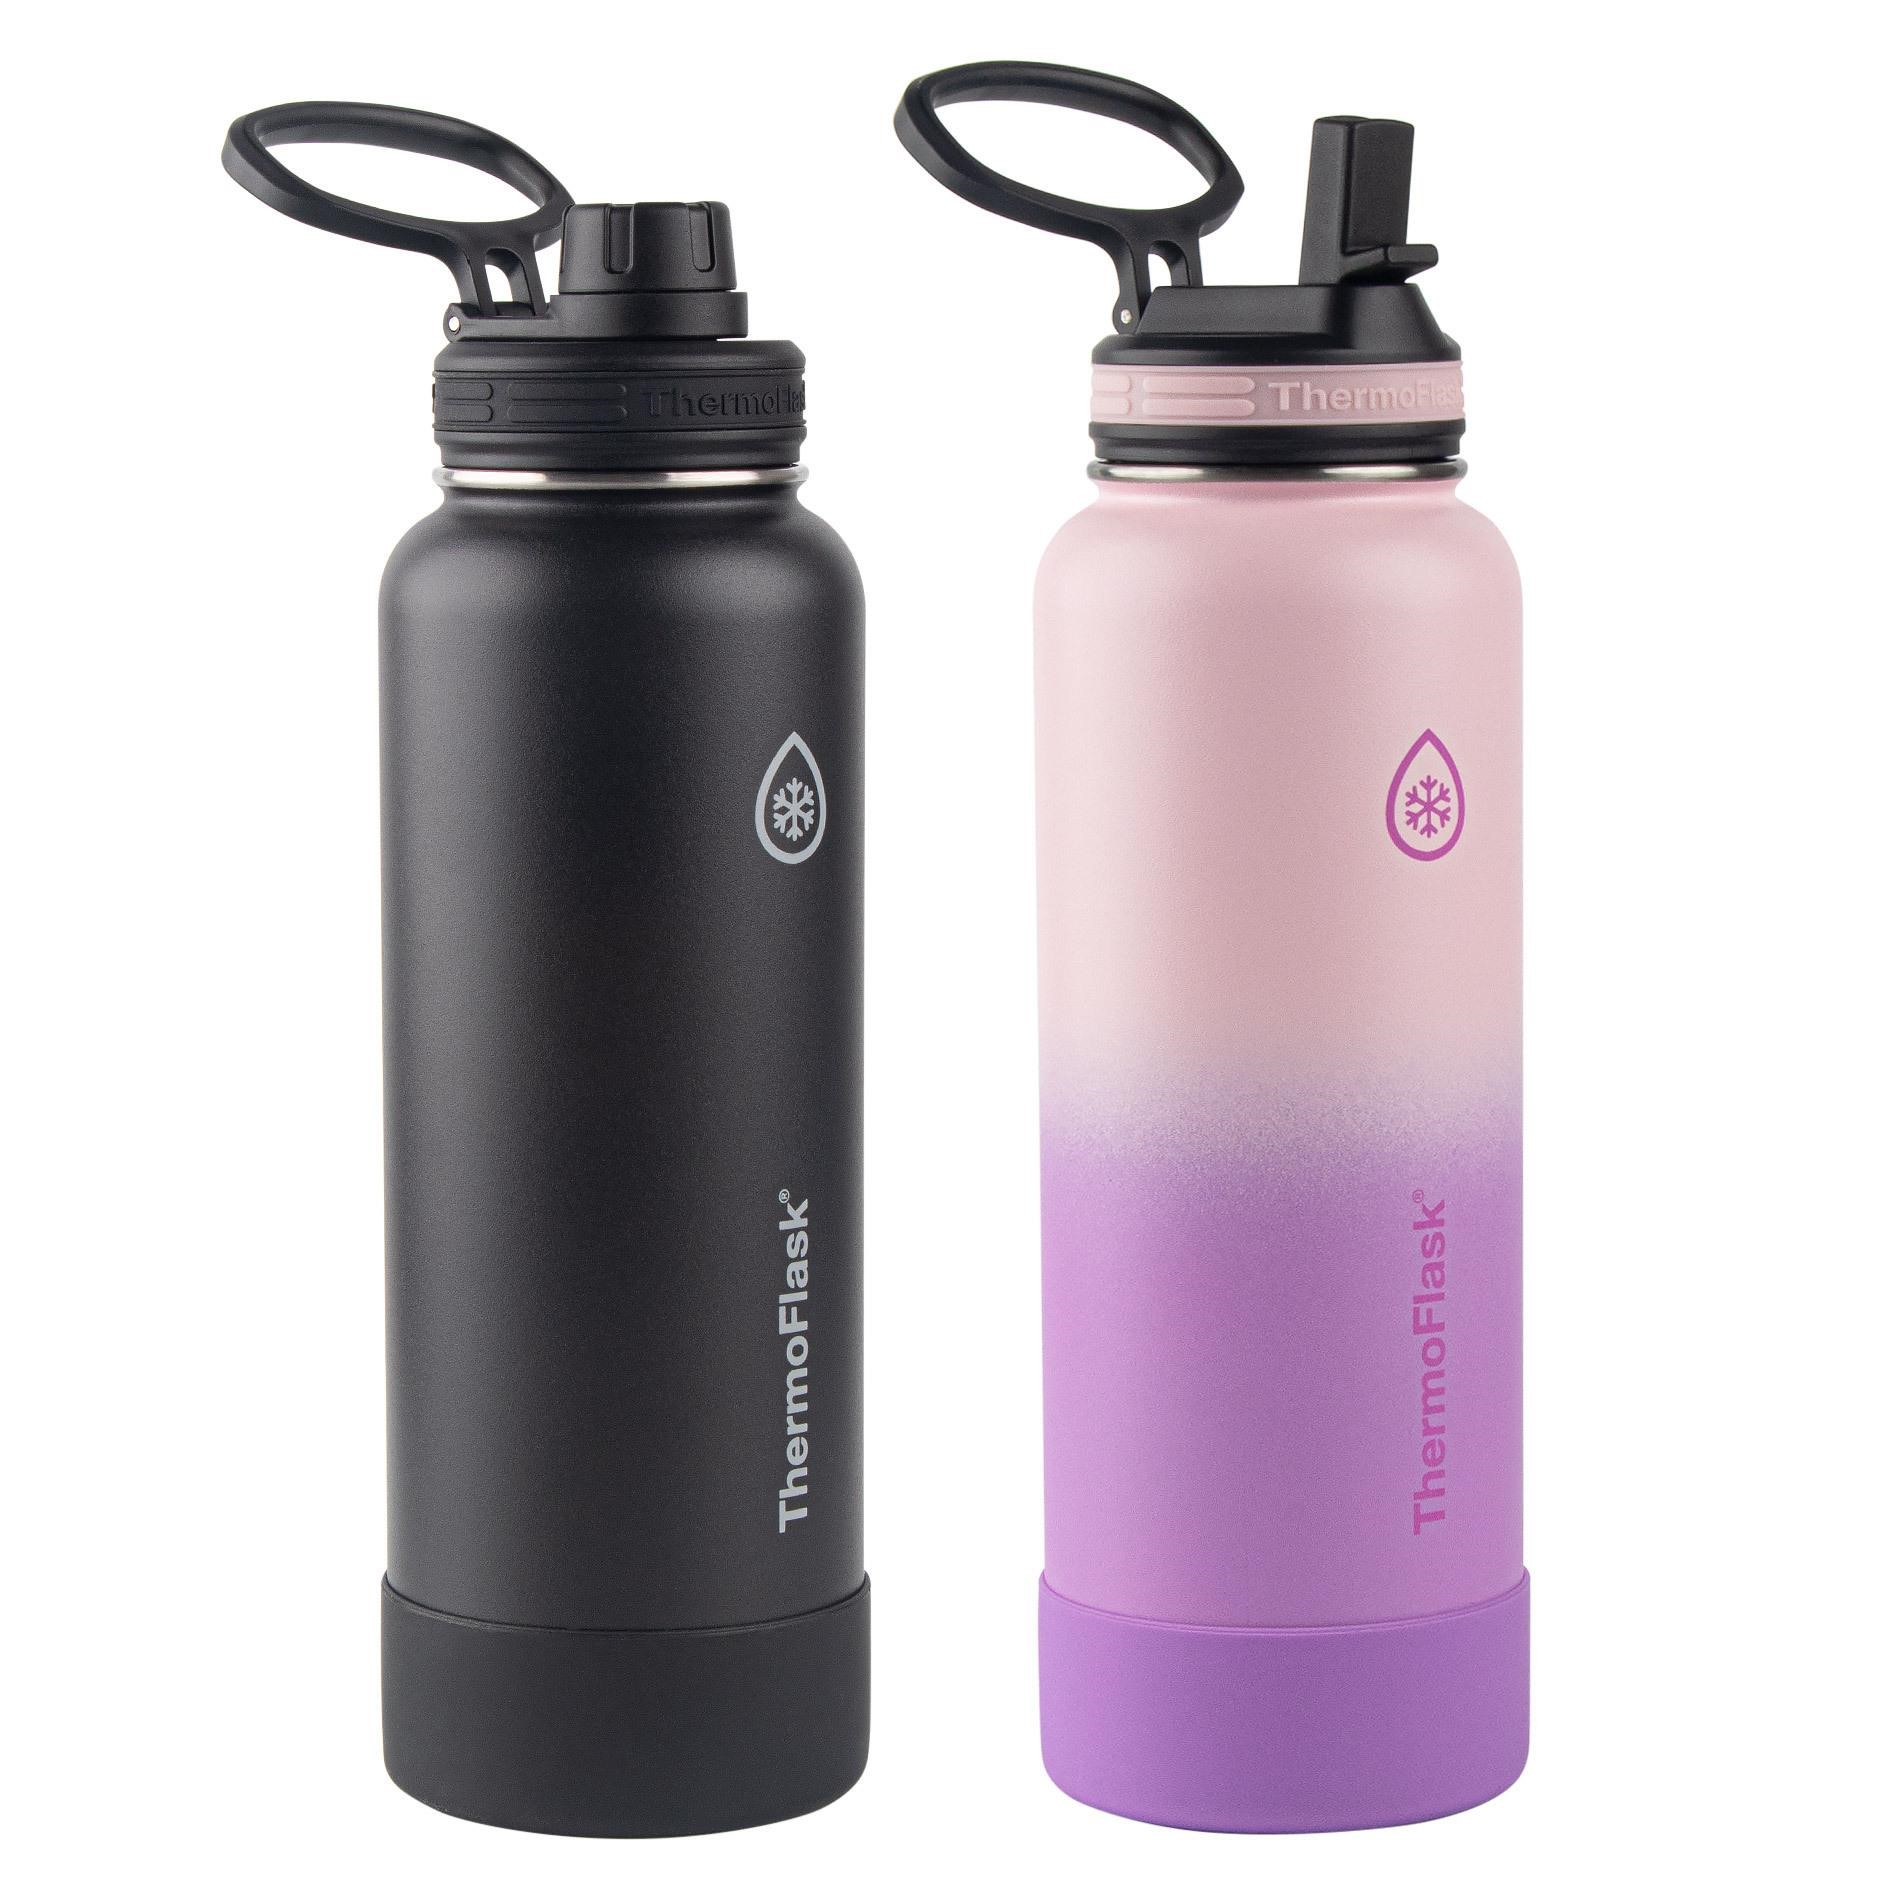 ThermoFlask 40oz Stainless Steel Bottles, 2pk